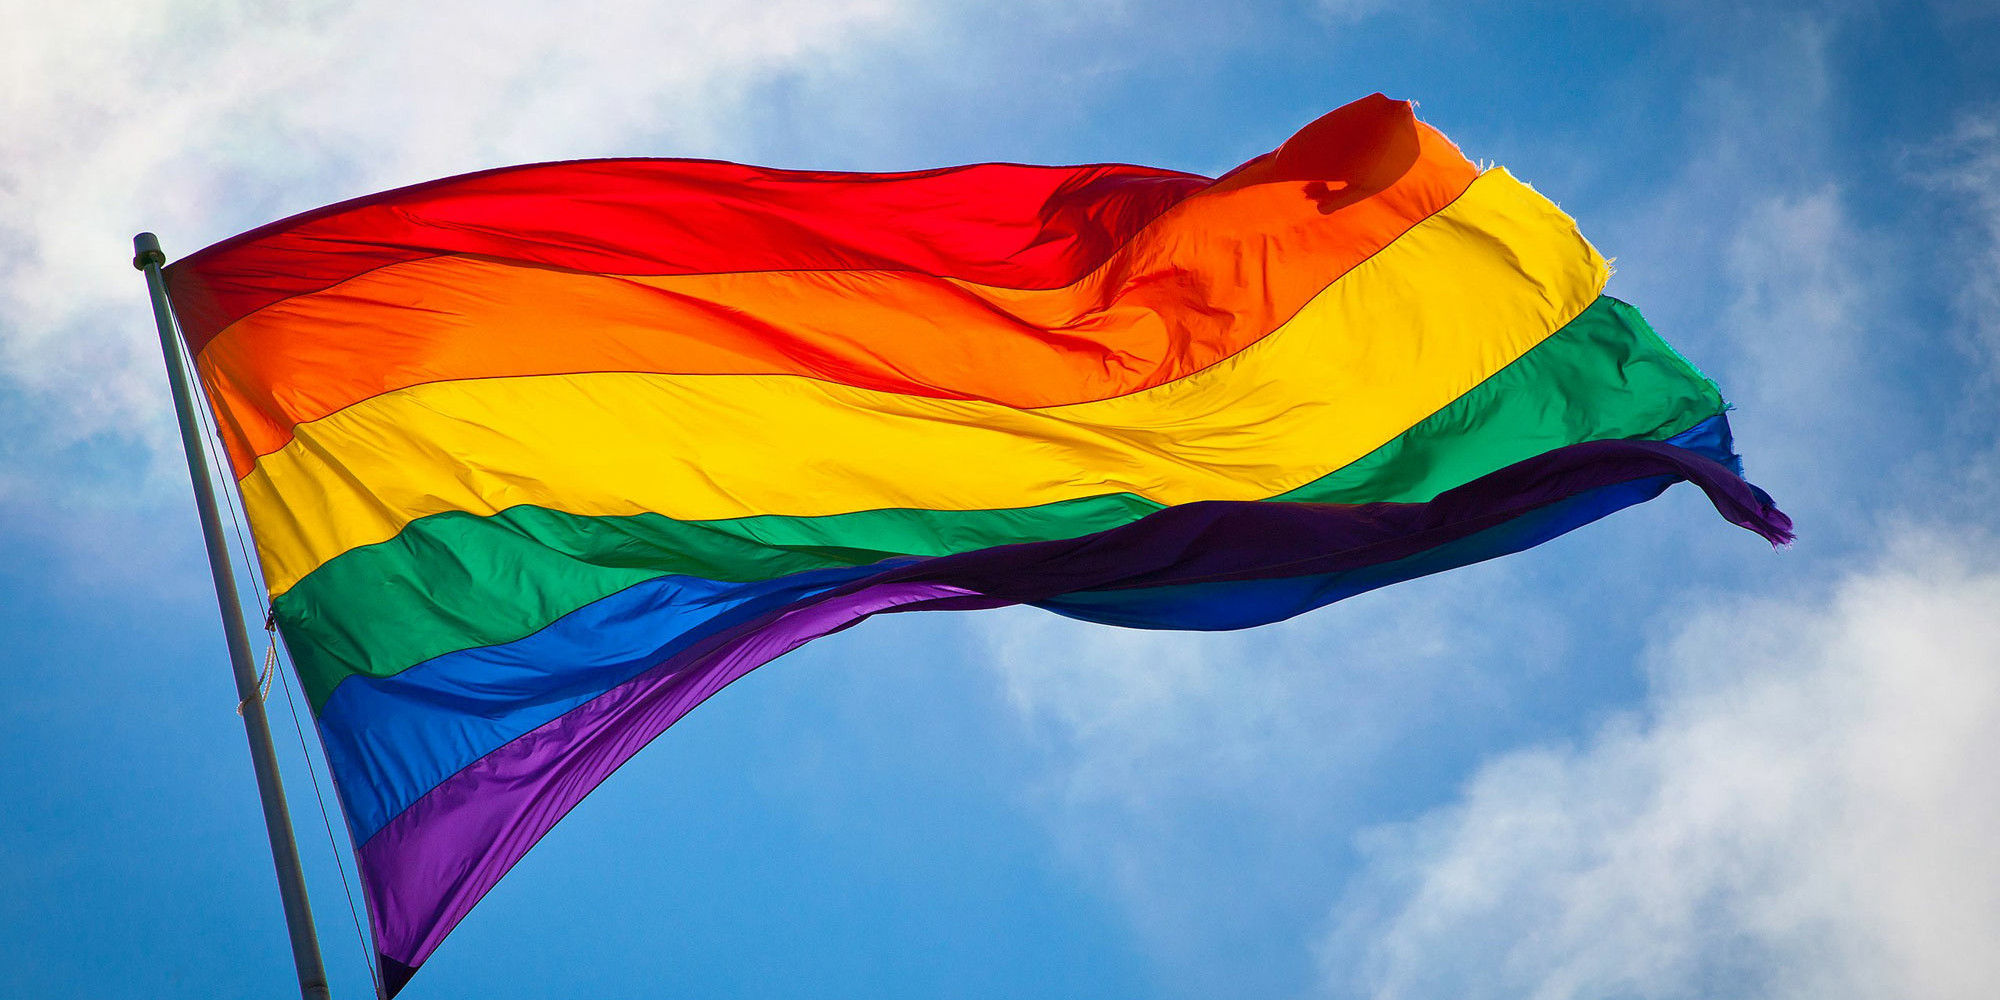 The Rainbow Flag waving in the wind at San Francisco’s Castro District. Photo: Benson Kua. Image used through Creative Commons Attribution-ShareAlike 2.0 Generic